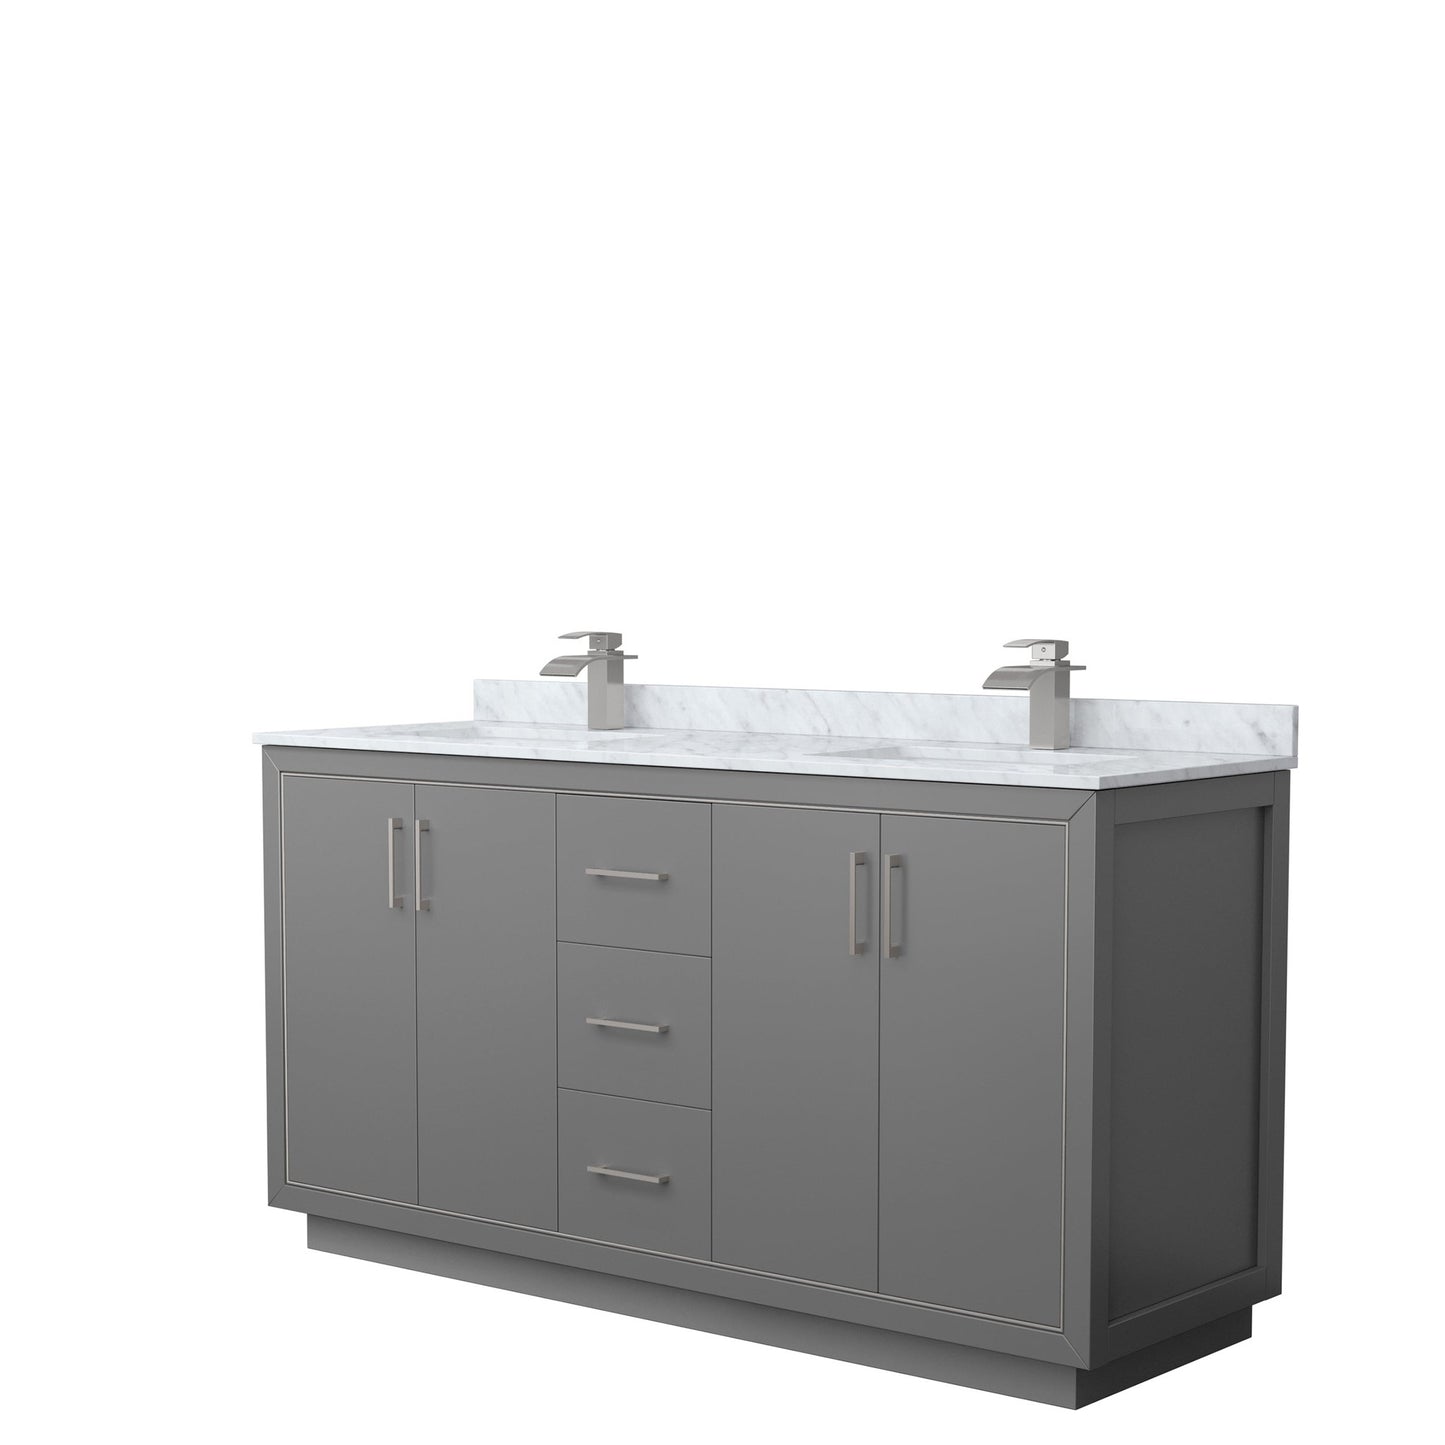 Wyndham Collection Icon 66" Double Bathroom Vanity in Dark Gray, White Carrara Marble Countertop, Undermount Square Sinks, Brushed Nickel Trim